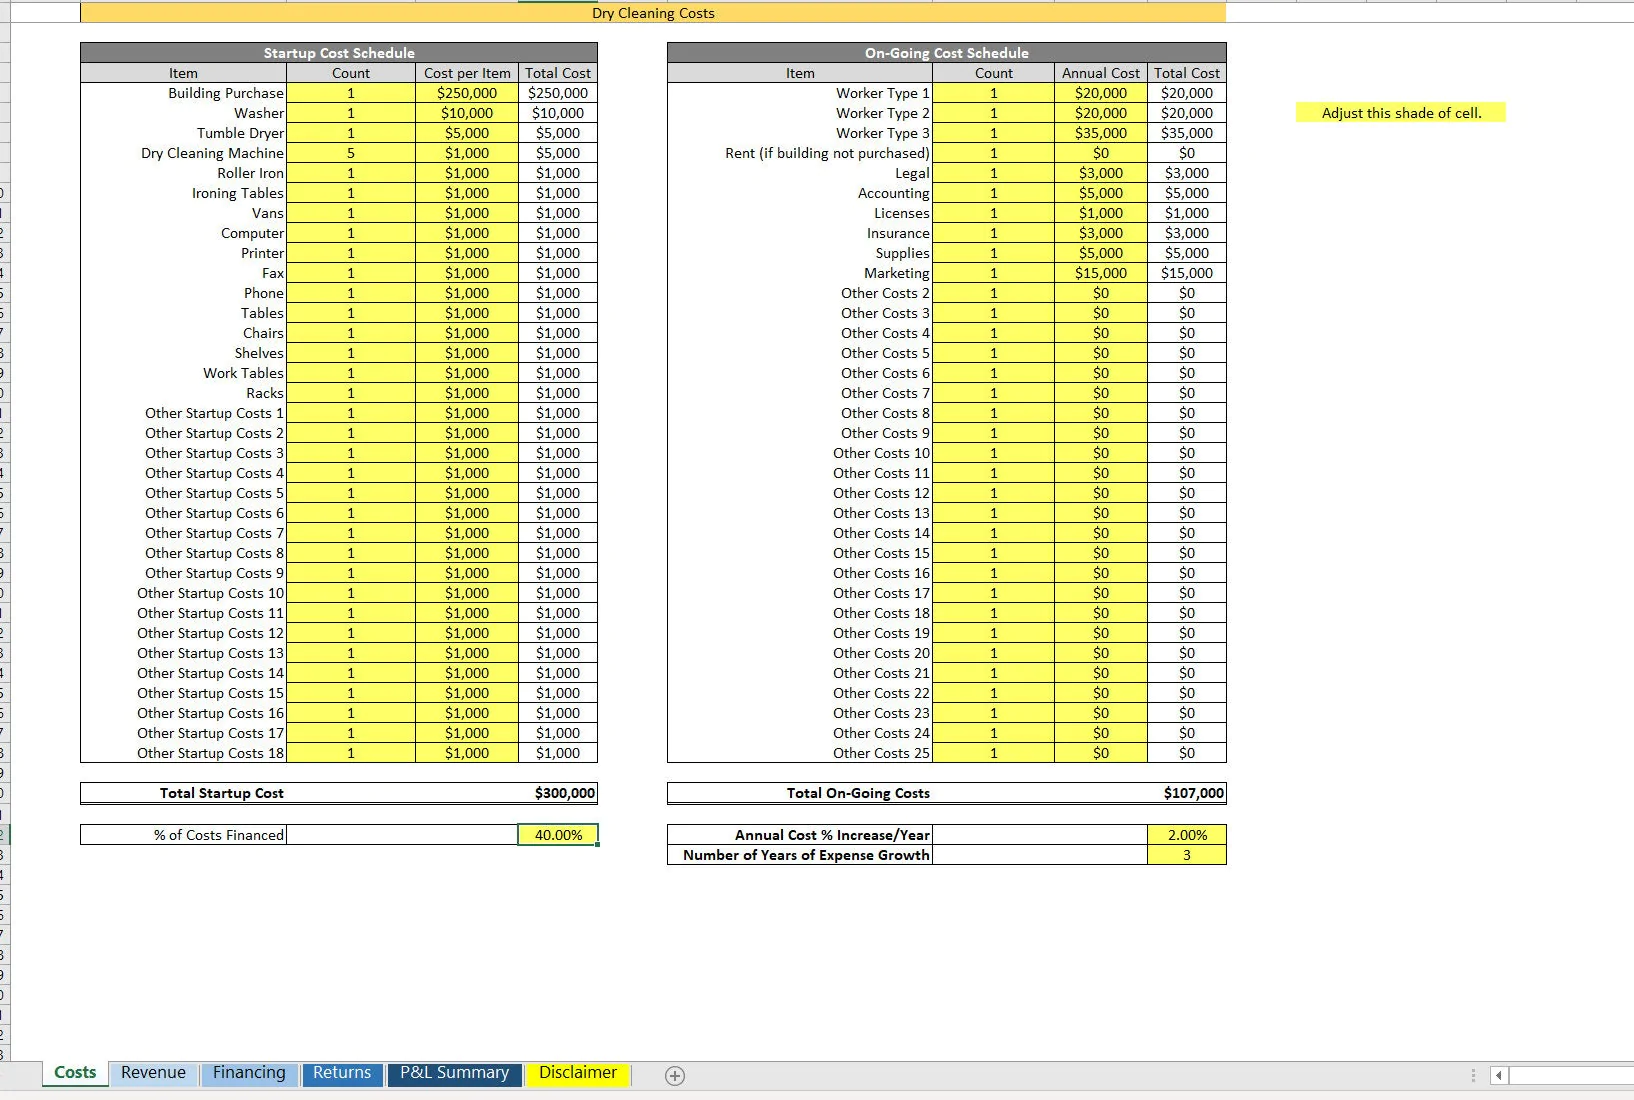 Dry Cleaning Business Financial Model (Excel workbook (XLSX)) Preview Image